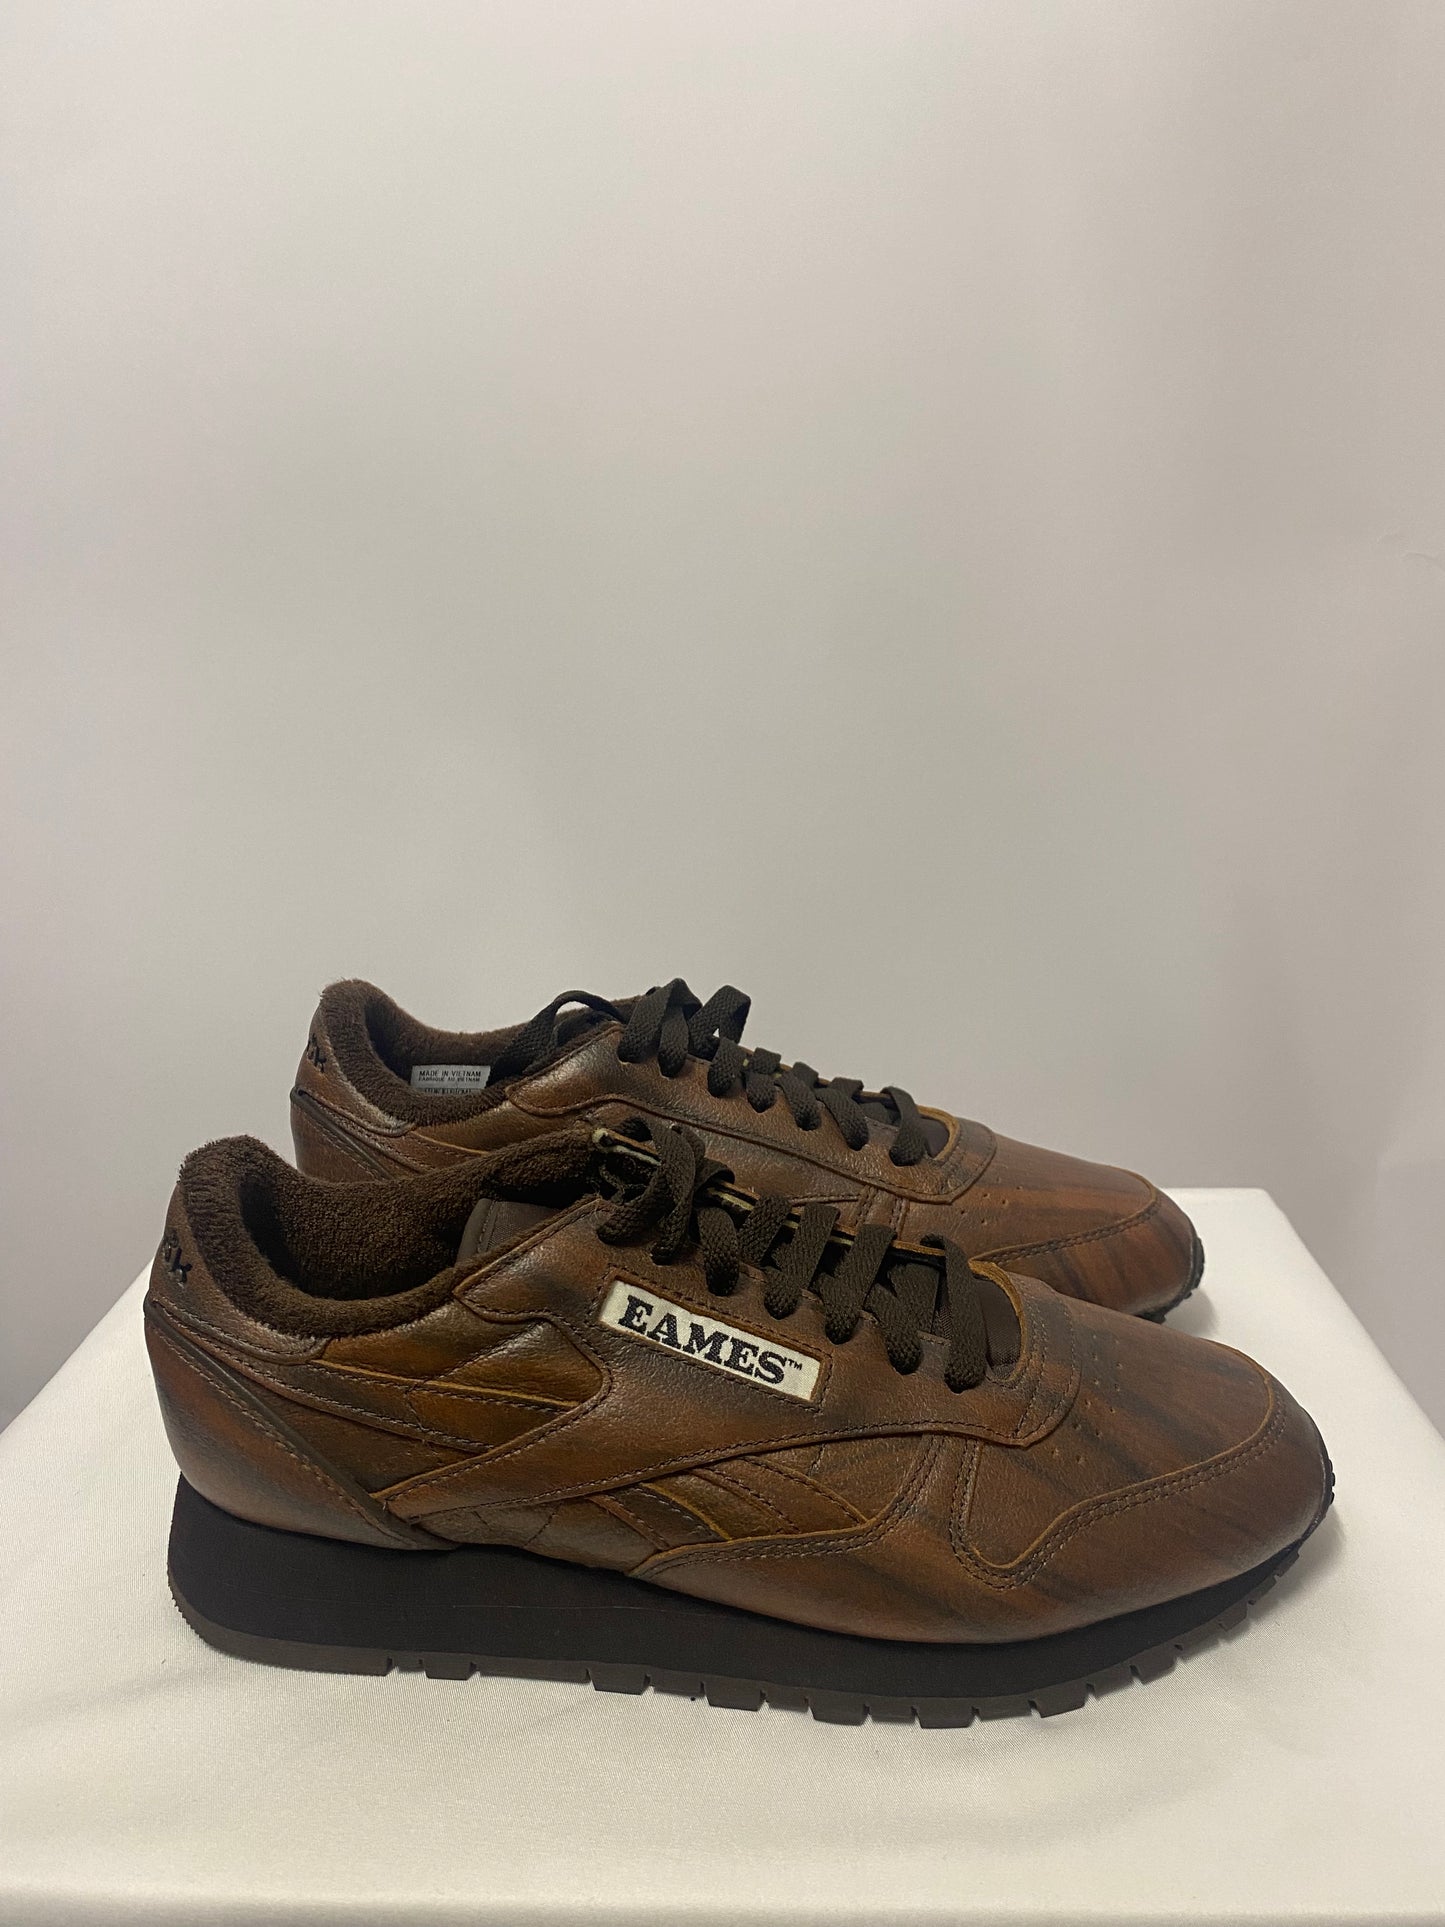 Reebok X Eames Office Brown Leather Trainer 7